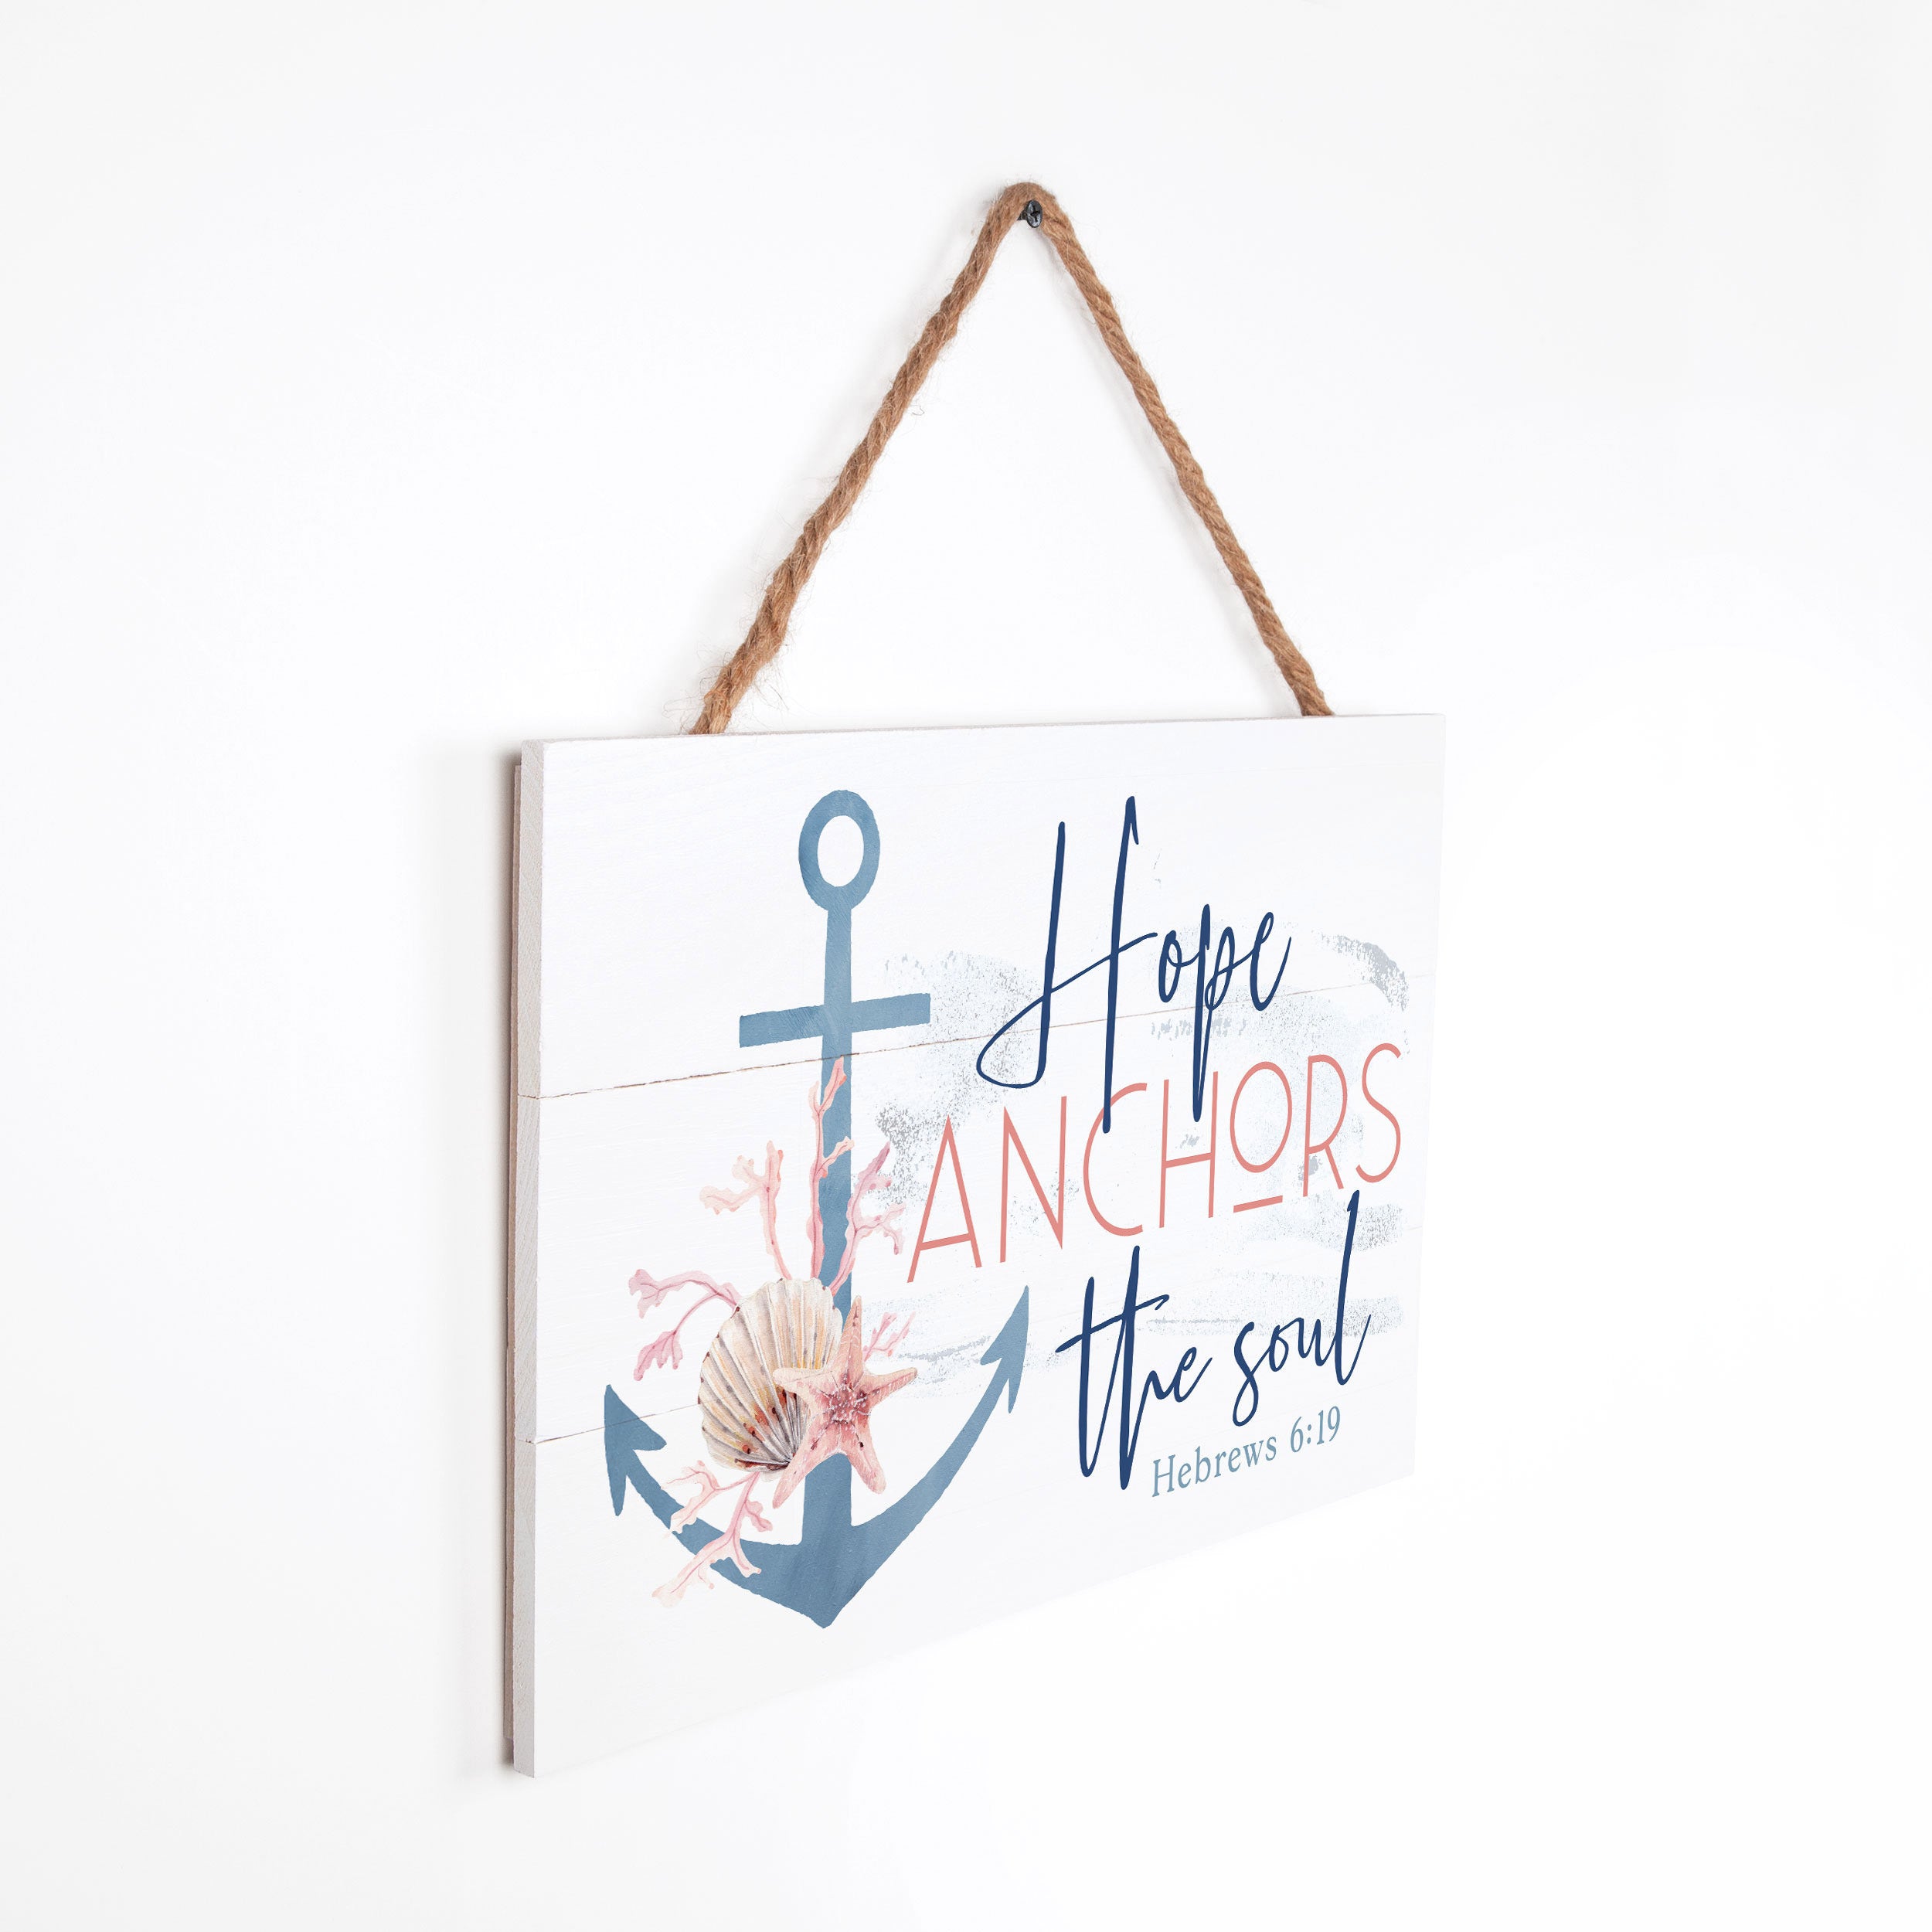 Hope Anchors the Soul Hebrews 6:19 Outdoor Hanging Sign